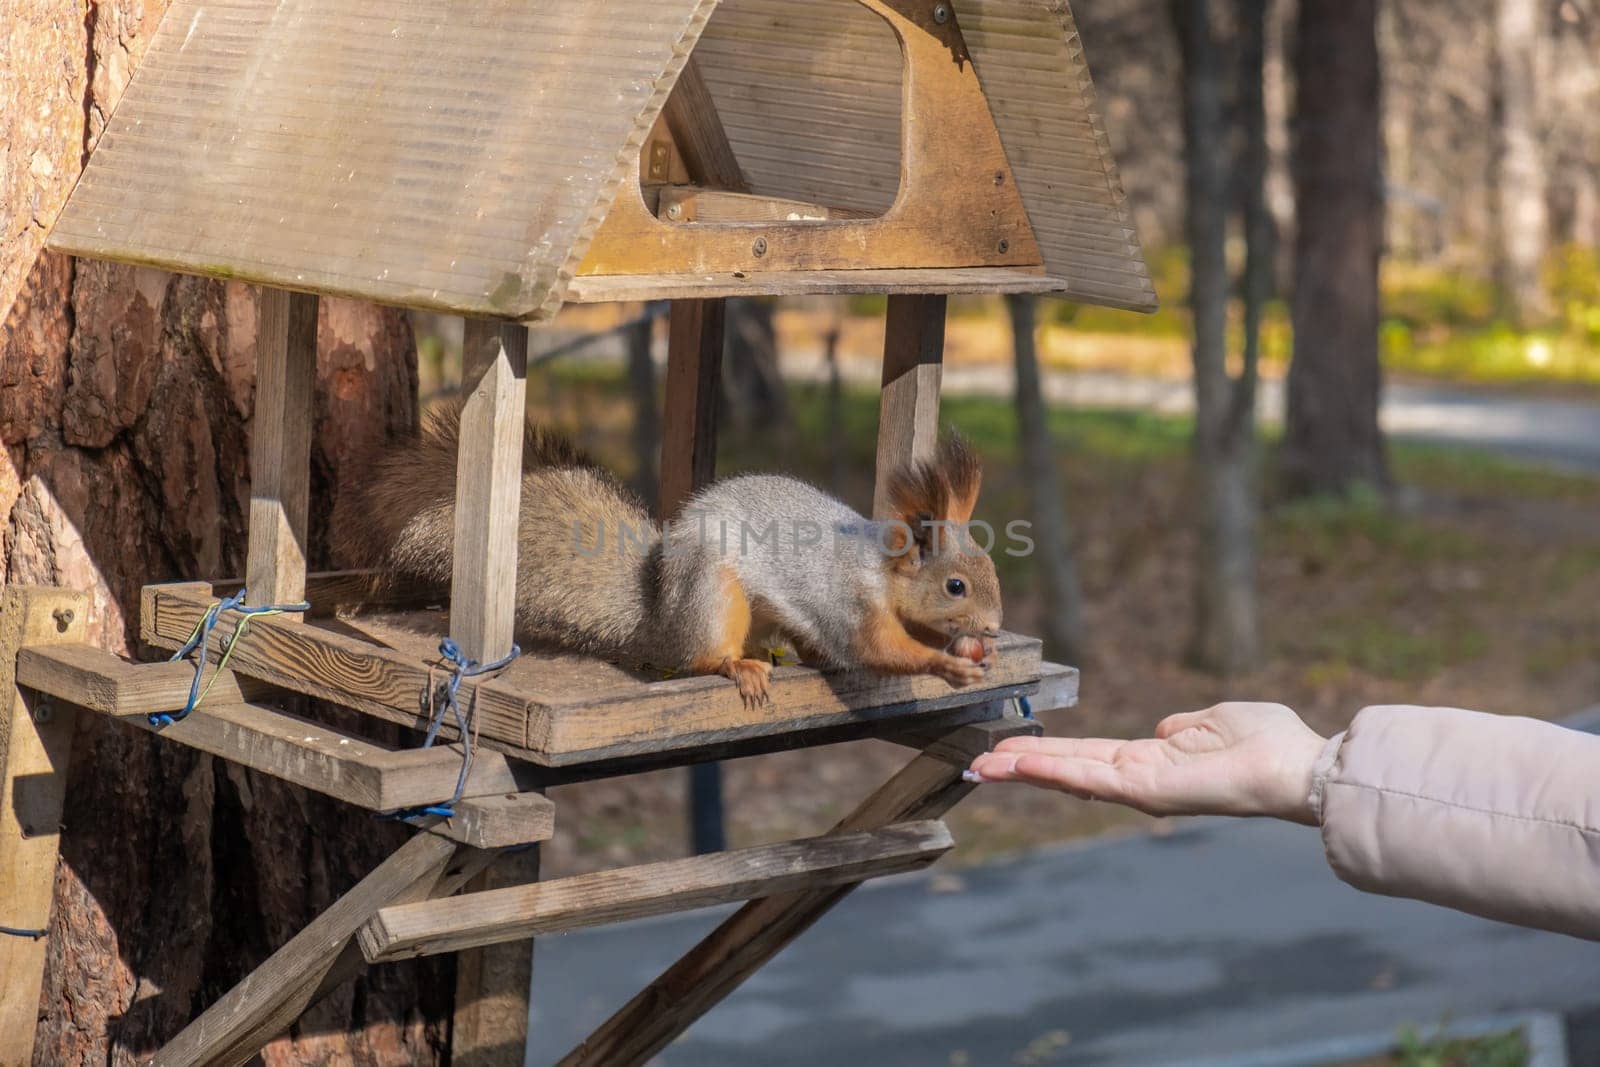 A beautiful red squirrel eats nuts in the forest from a man's hand. A squirrel with a fluffy tail sits and eats nuts close-up. A child feeds a squirrel.